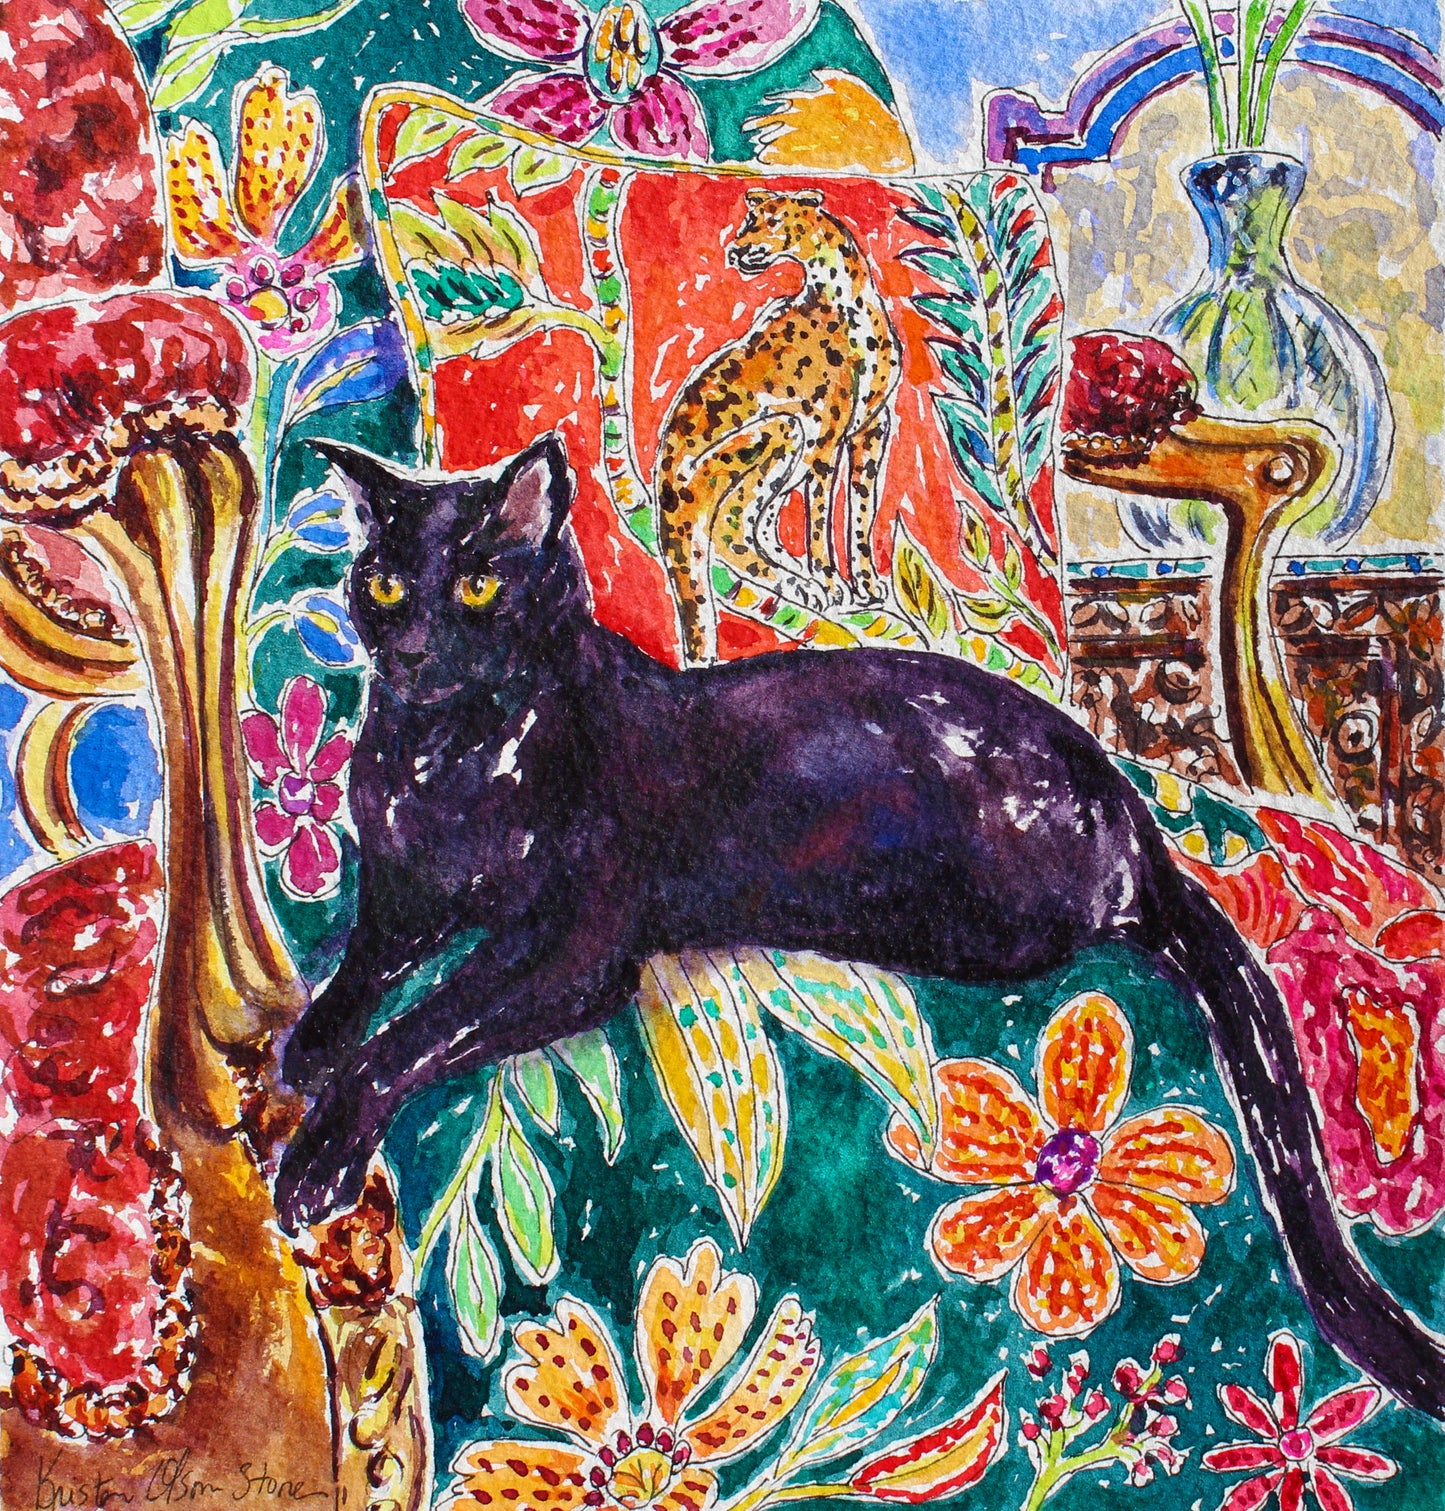 Prince Tim, An Original 7" x 7" Watercolor And Ink Painting Of A Black Cat With Colorful Fabric